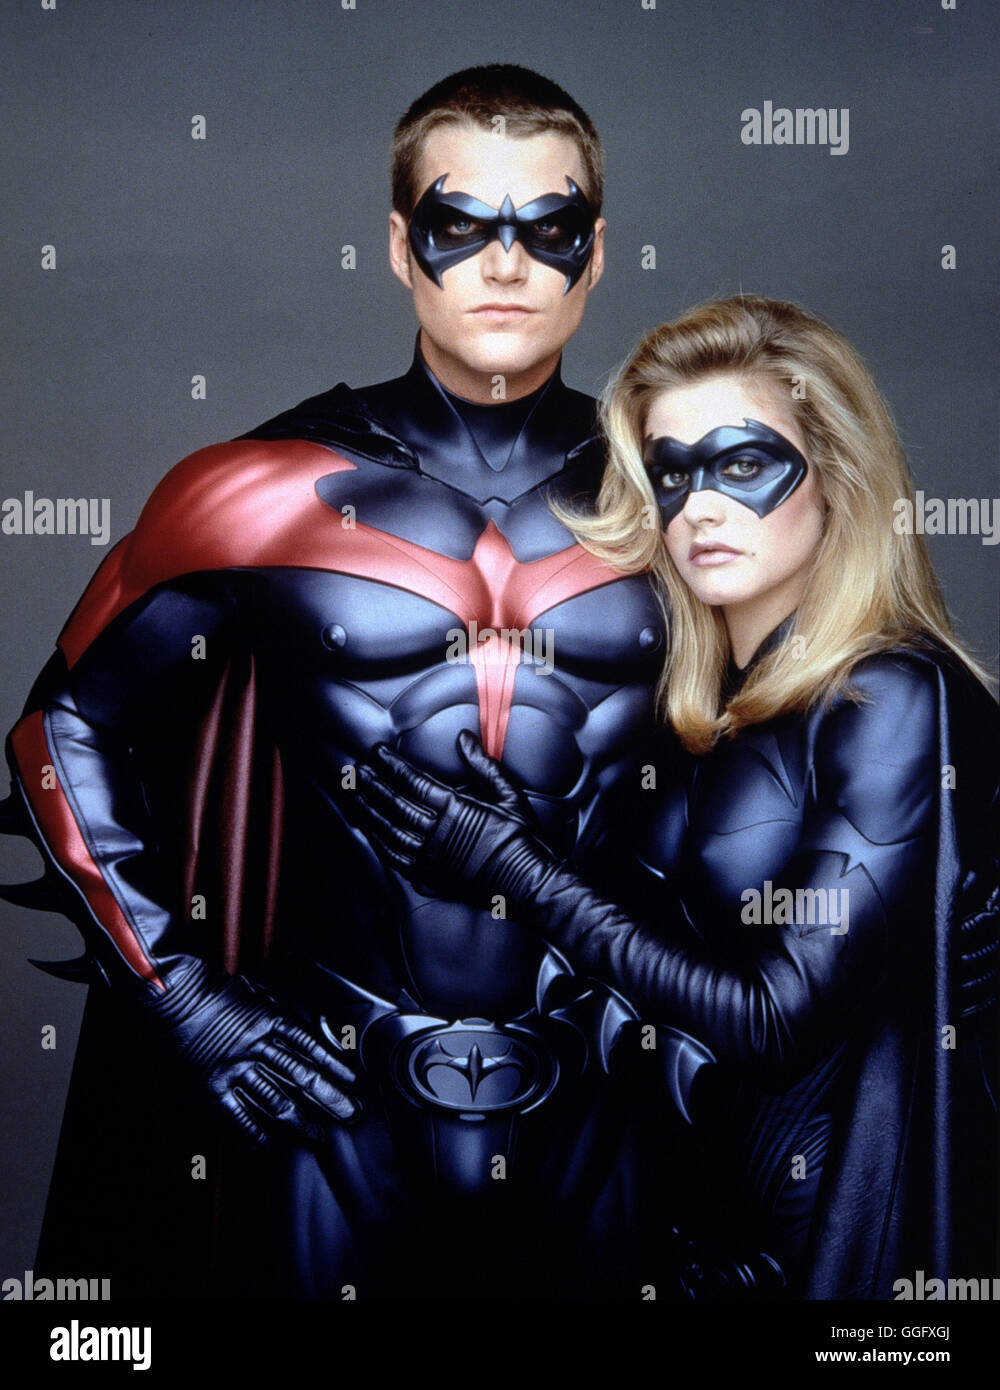 Alicia silverstone batgirl hi-res stock photography and images - Alamy